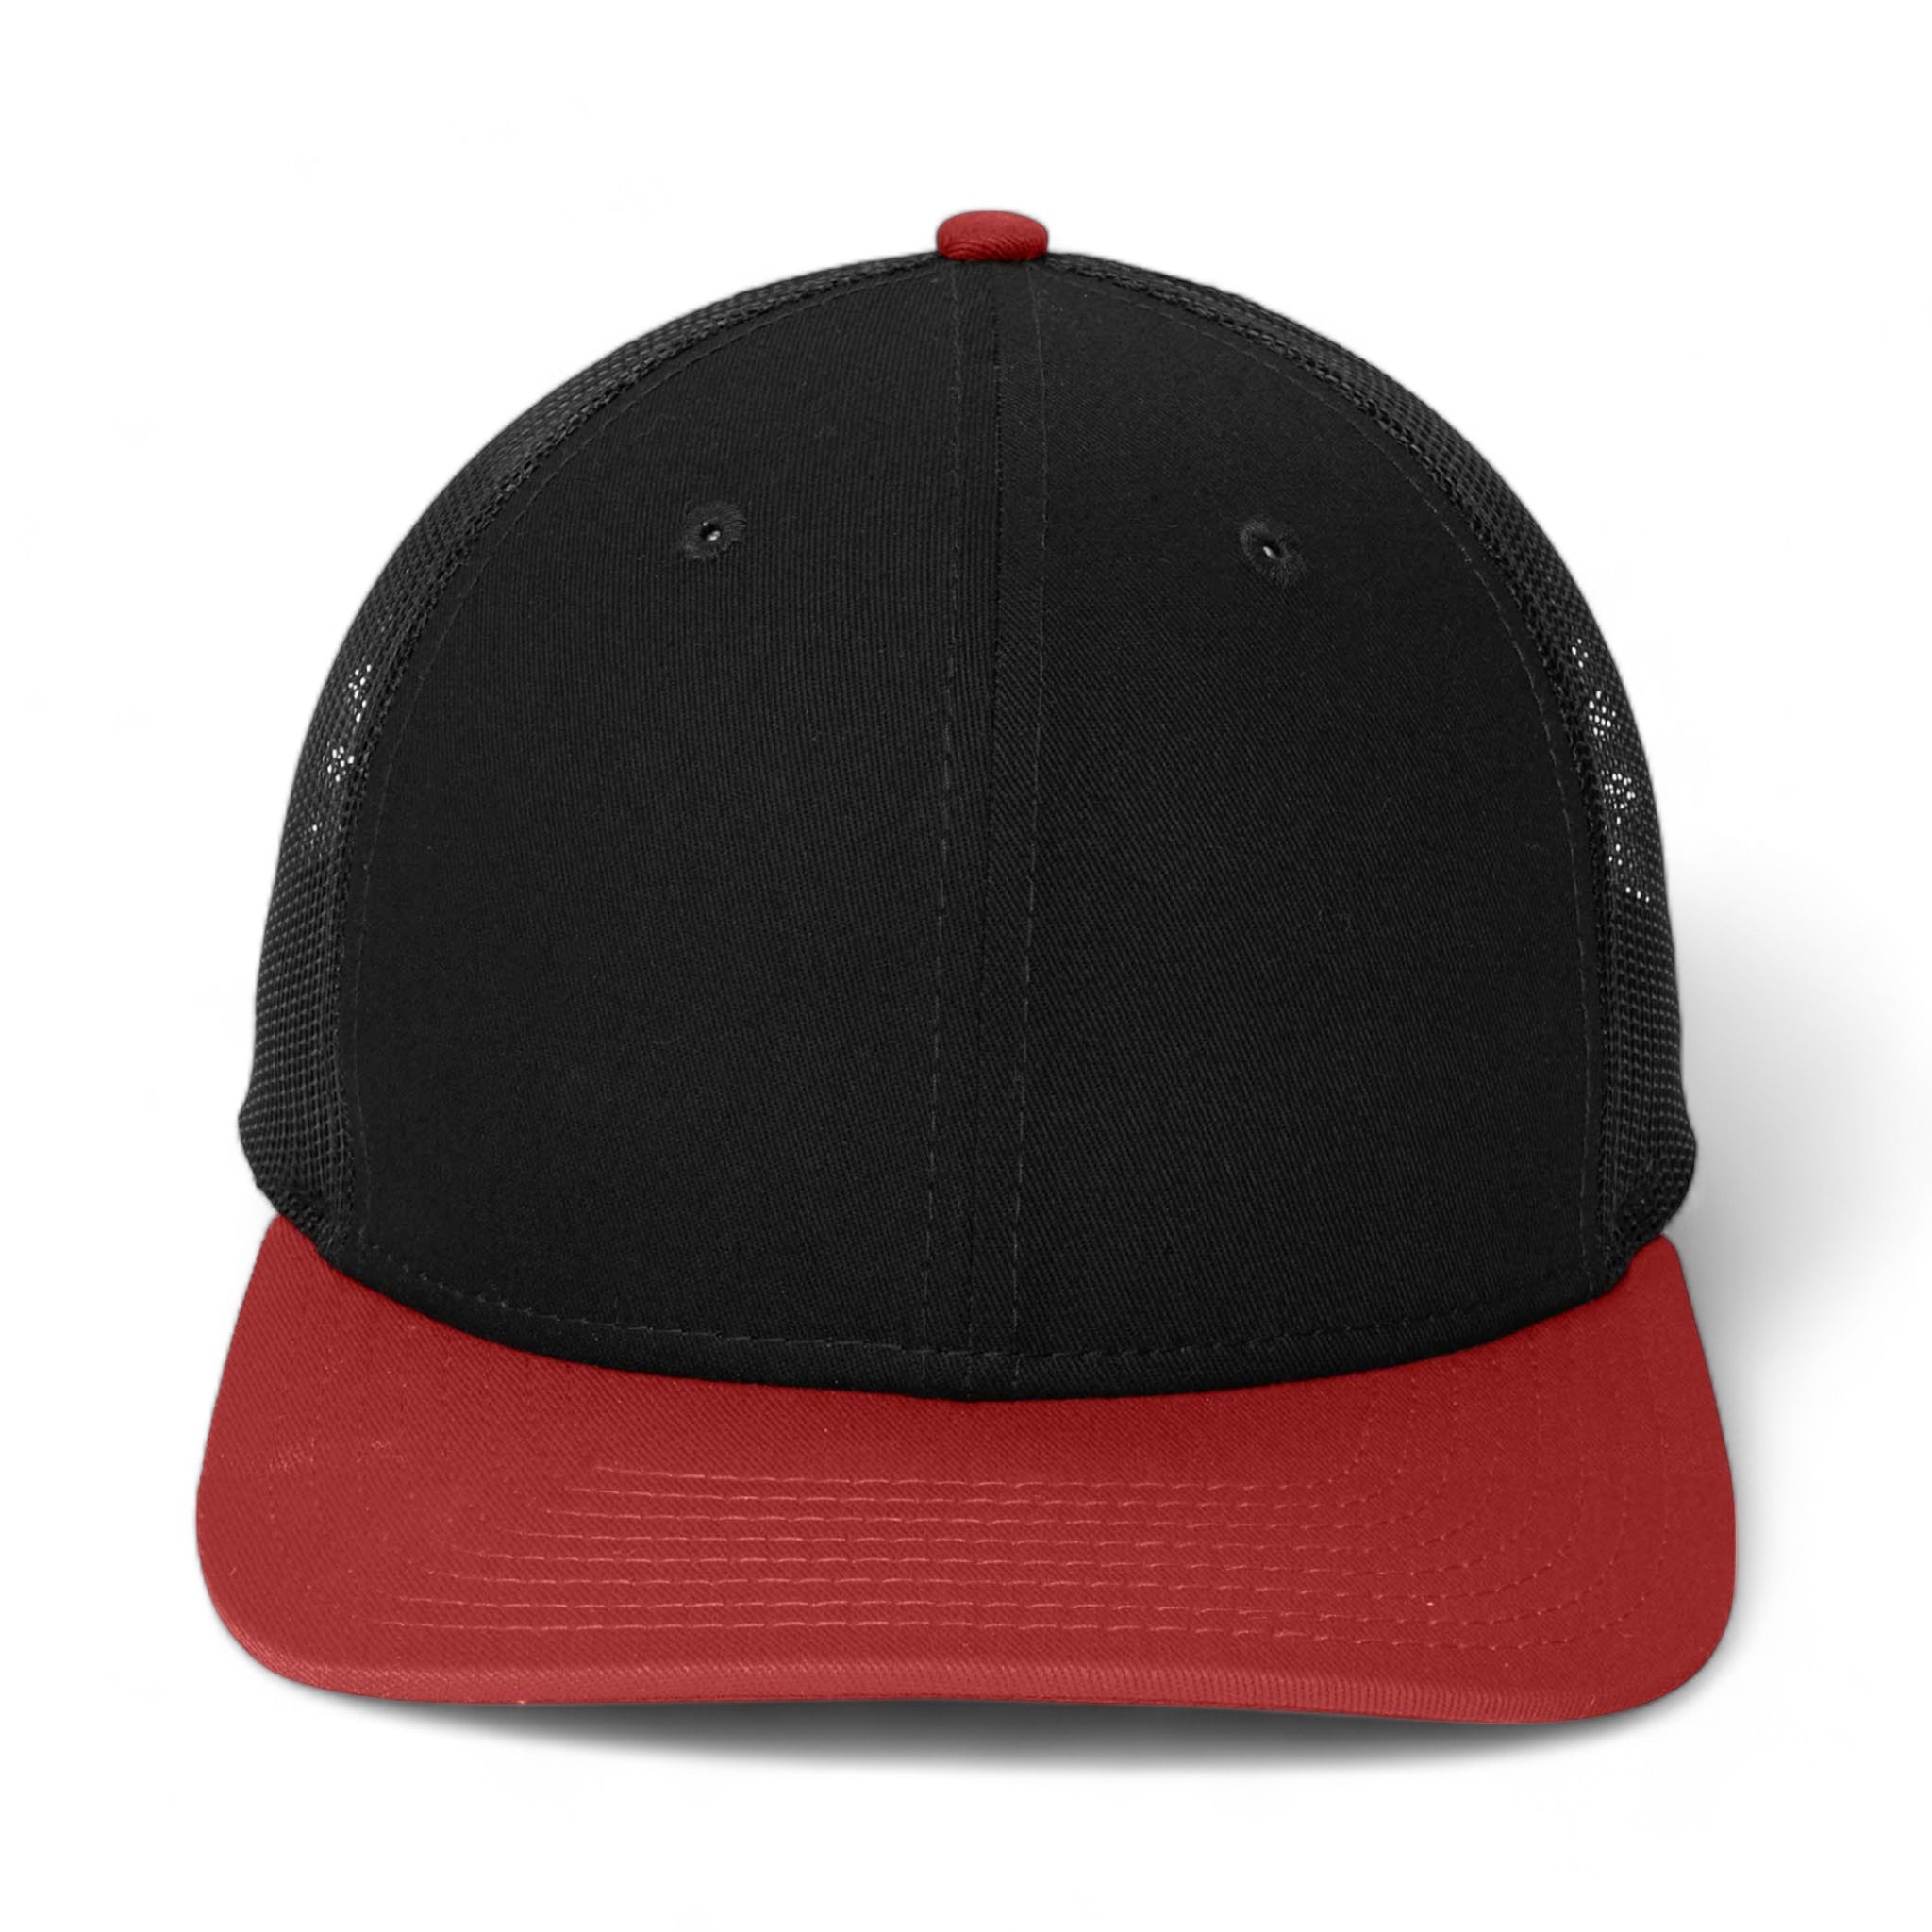 Front view of New Era NE207 custom hat in black and scarlet